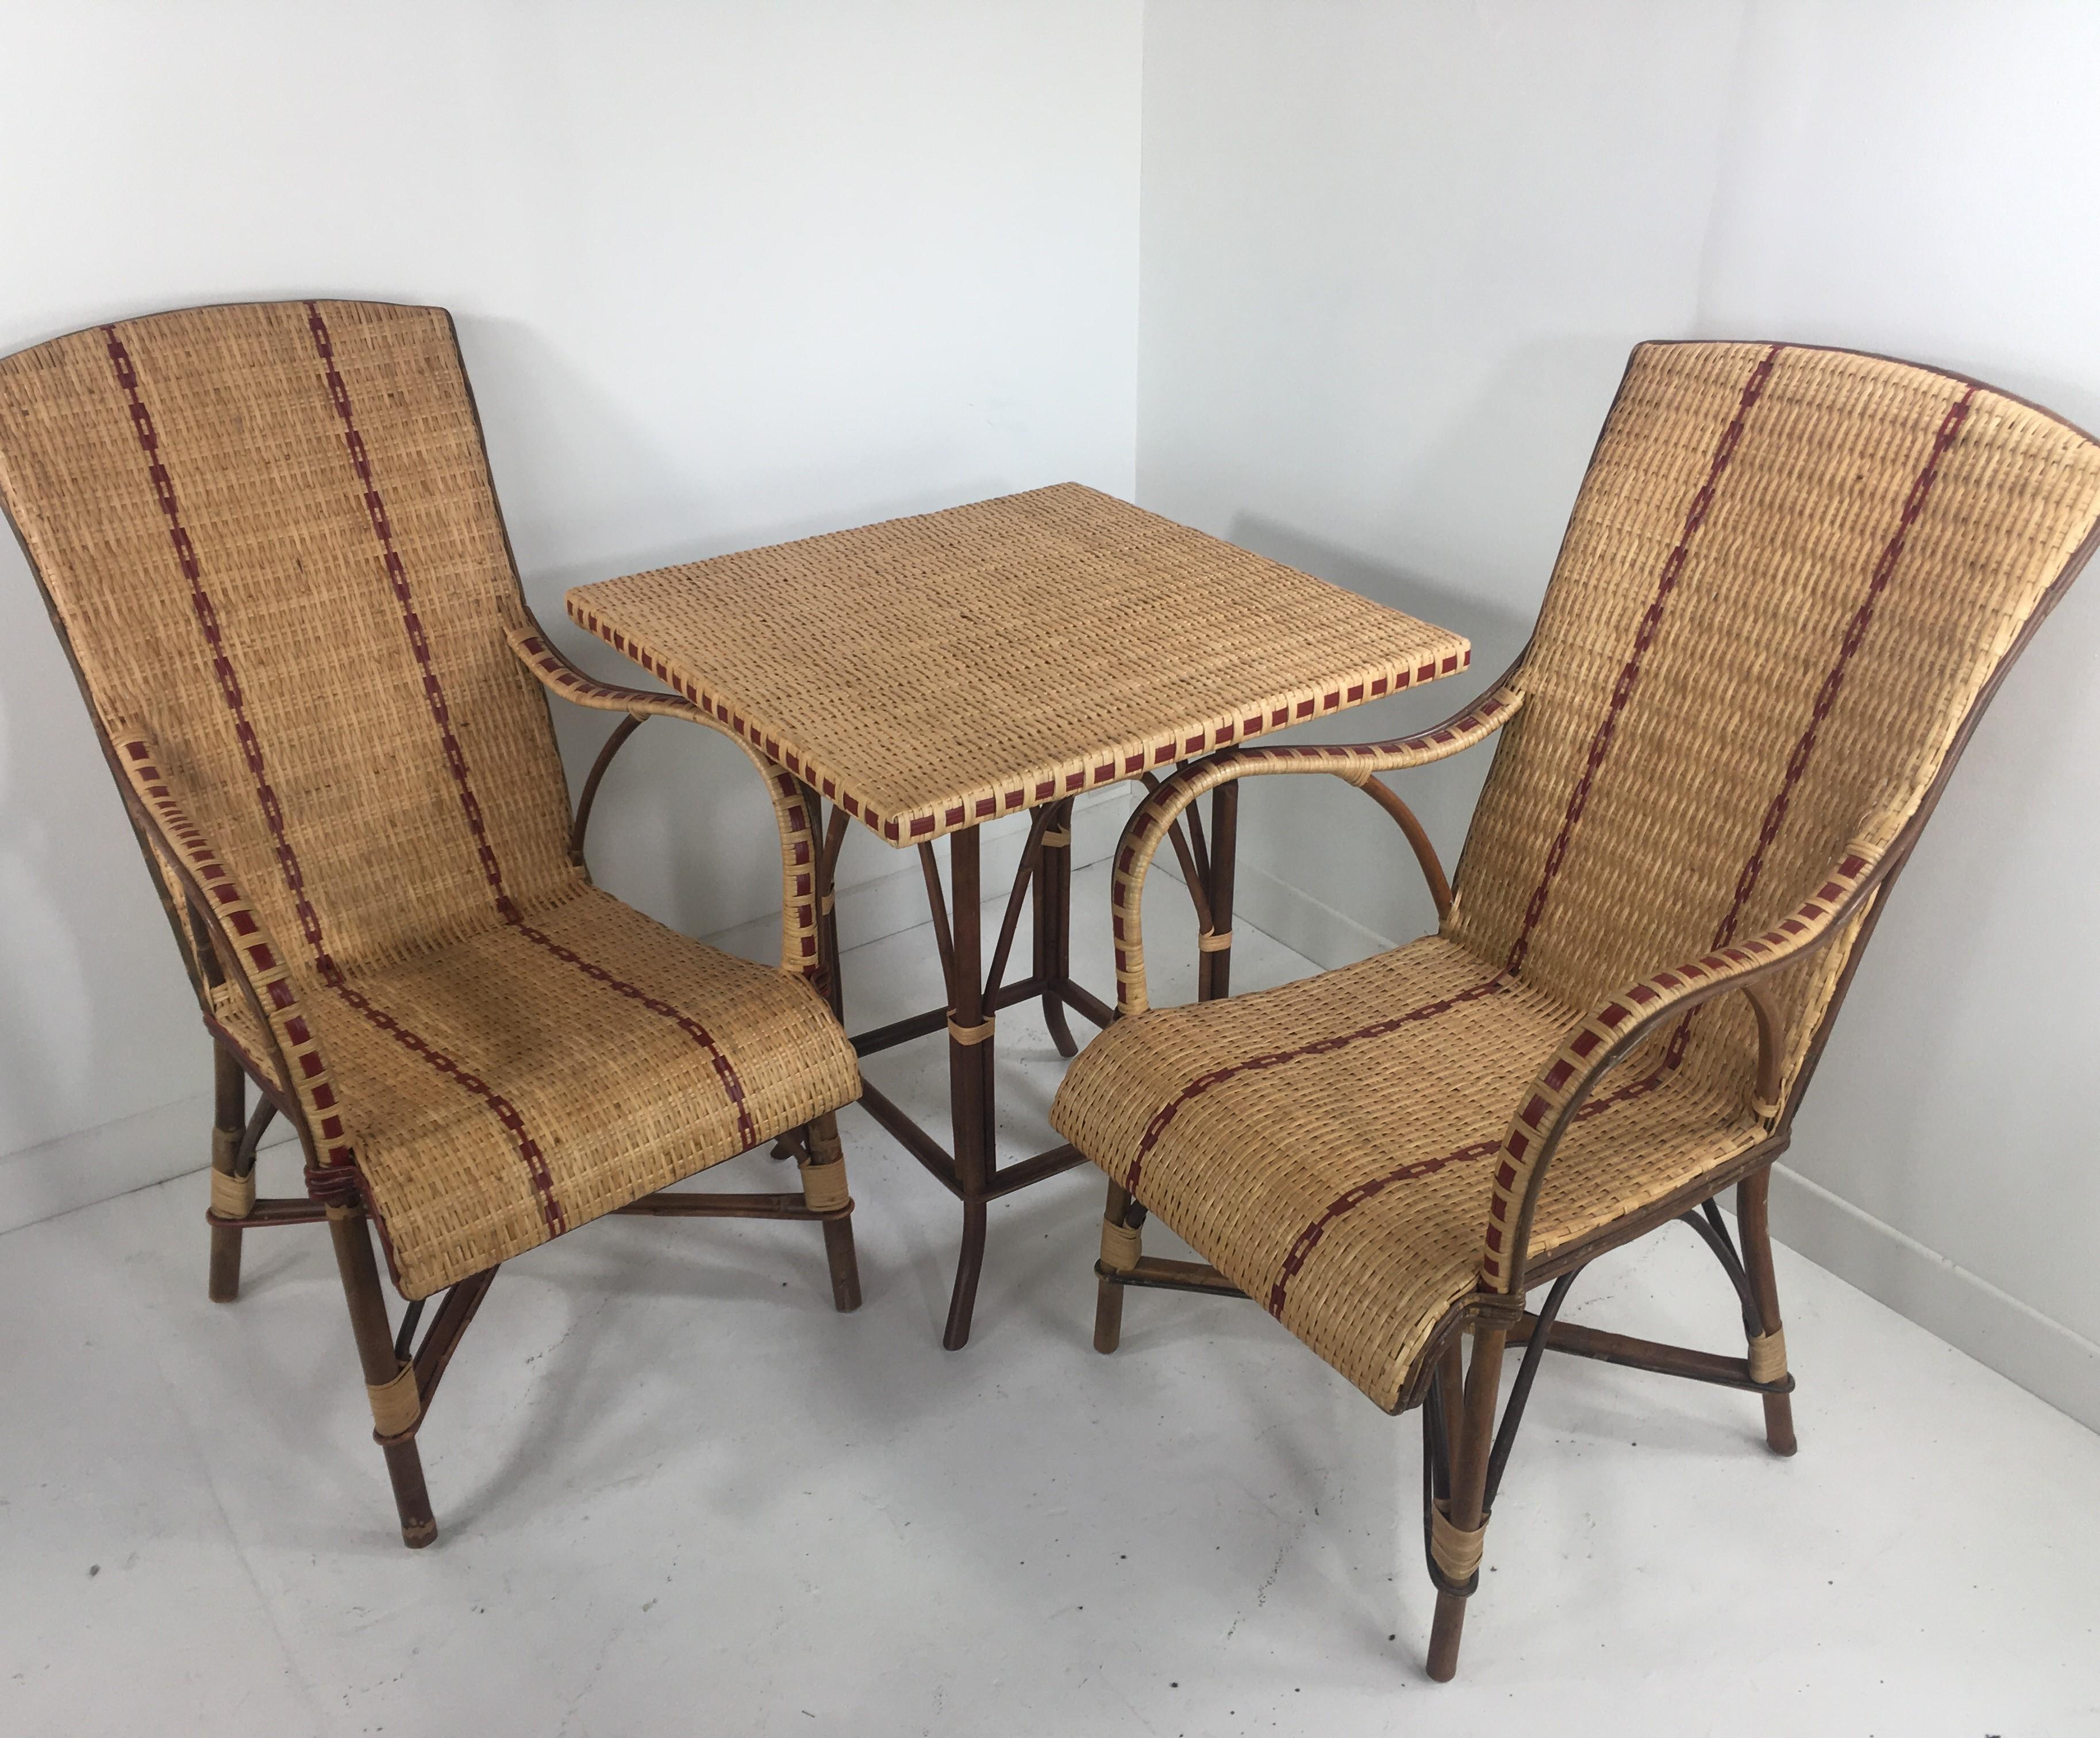 Contemporary French 1900s Design Bistro Pedestal Table in Rattan and Braided Wicker Cane For Sale